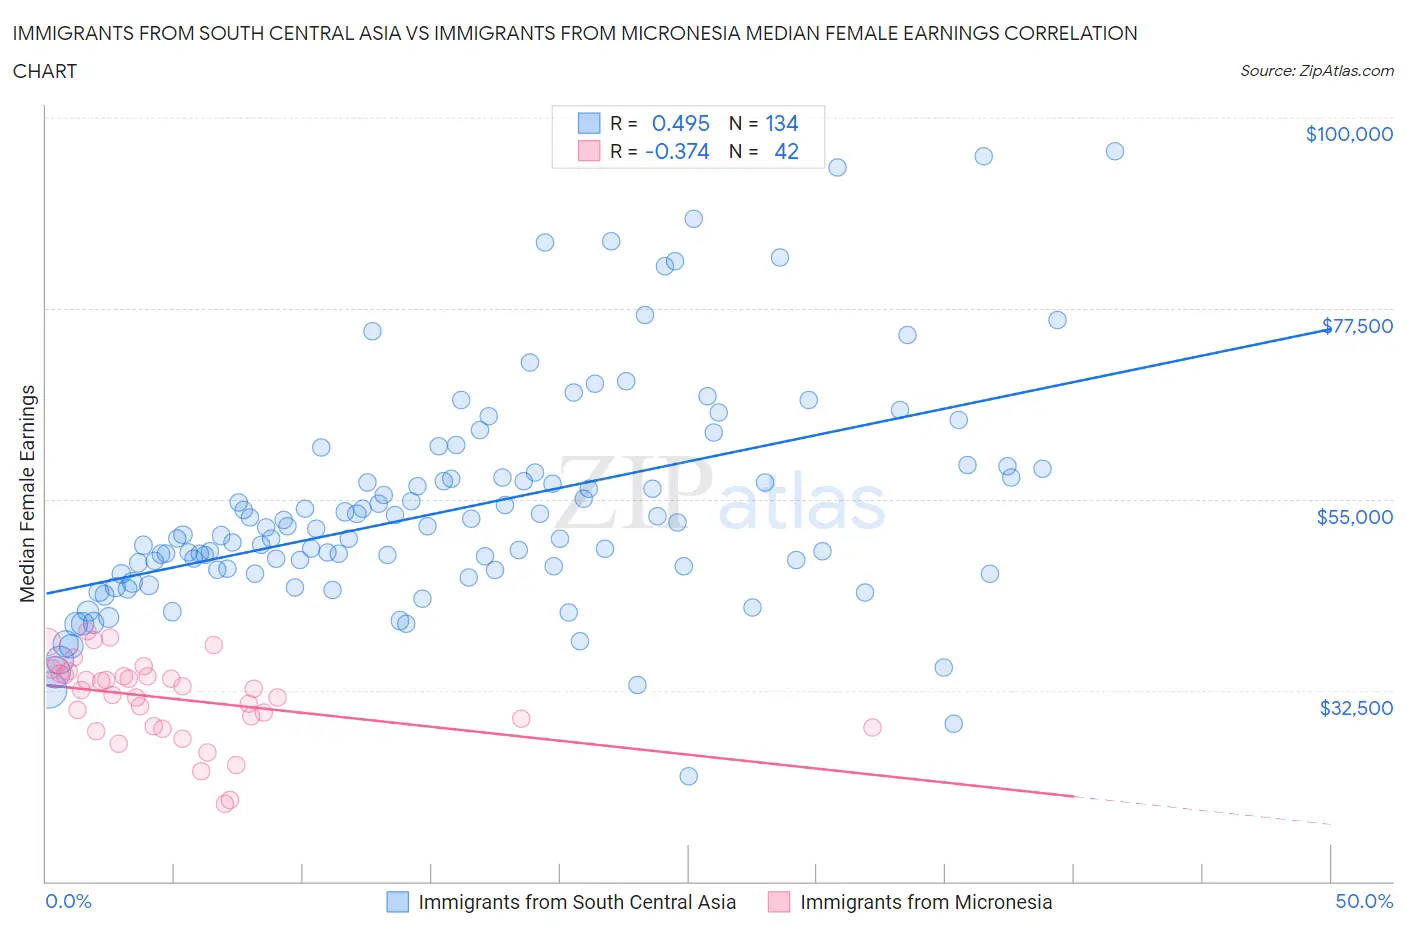 Immigrants from South Central Asia vs Immigrants from Micronesia Median Female Earnings